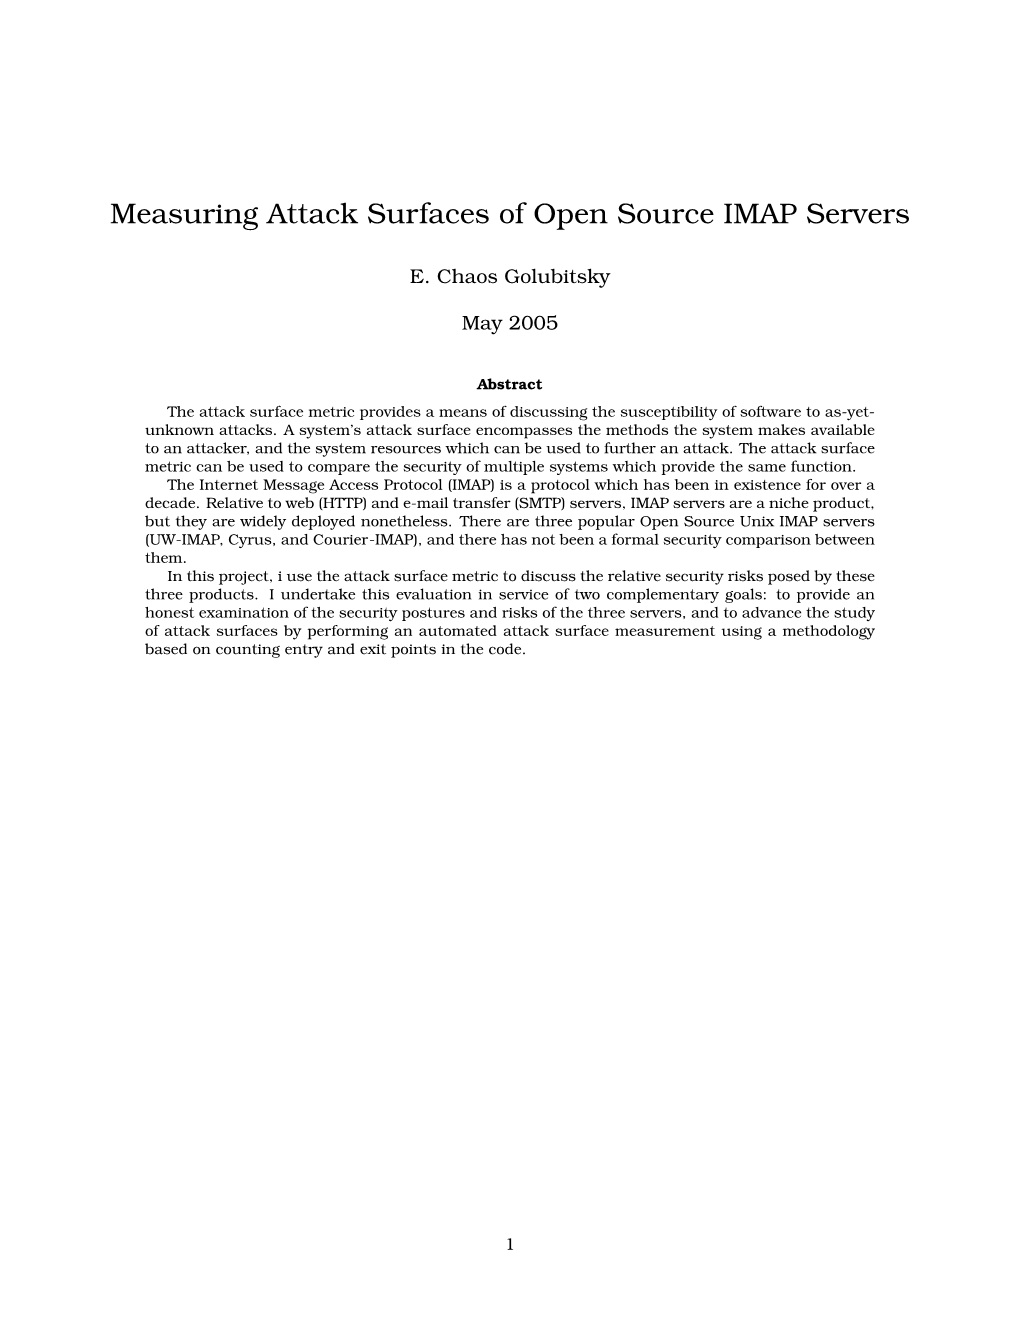 Measuring Attack Surfaces of Open Source IMAP Servers